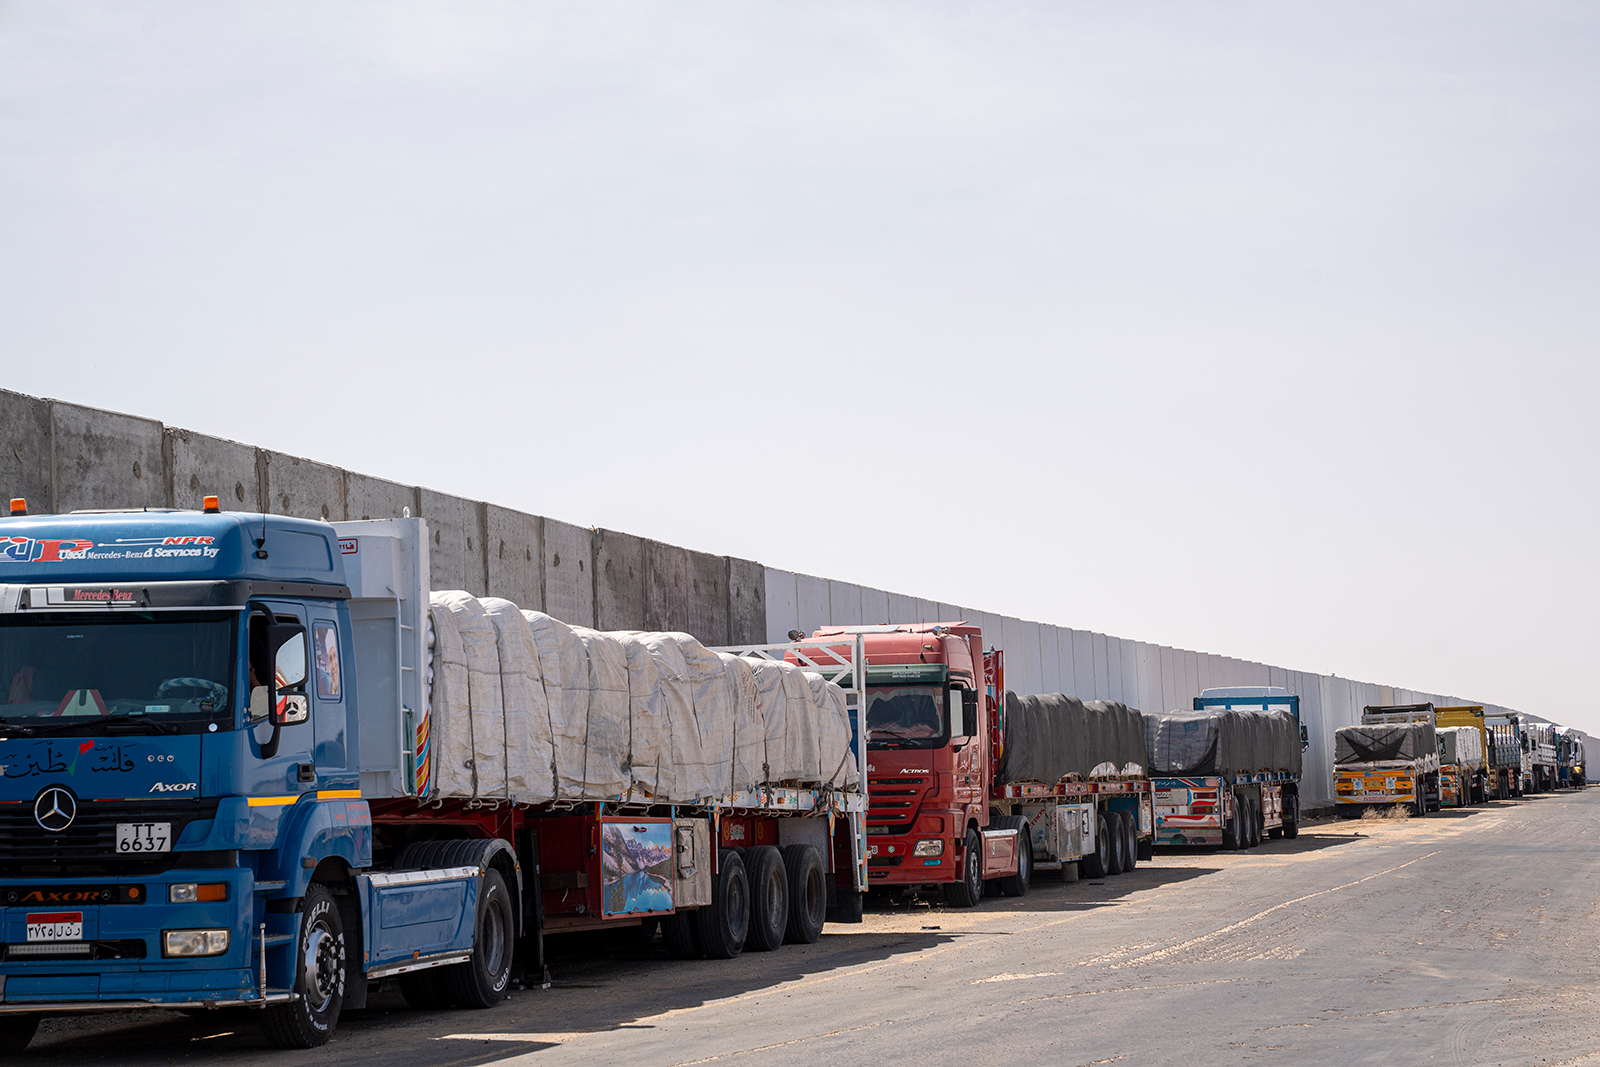 Aid trucks loaded with supplies for Gaza are waiting near the Egyptian-Palestinian border in preparation to enter Kerem Abu Salem crossing on May 26, in Rafah, Egypt.